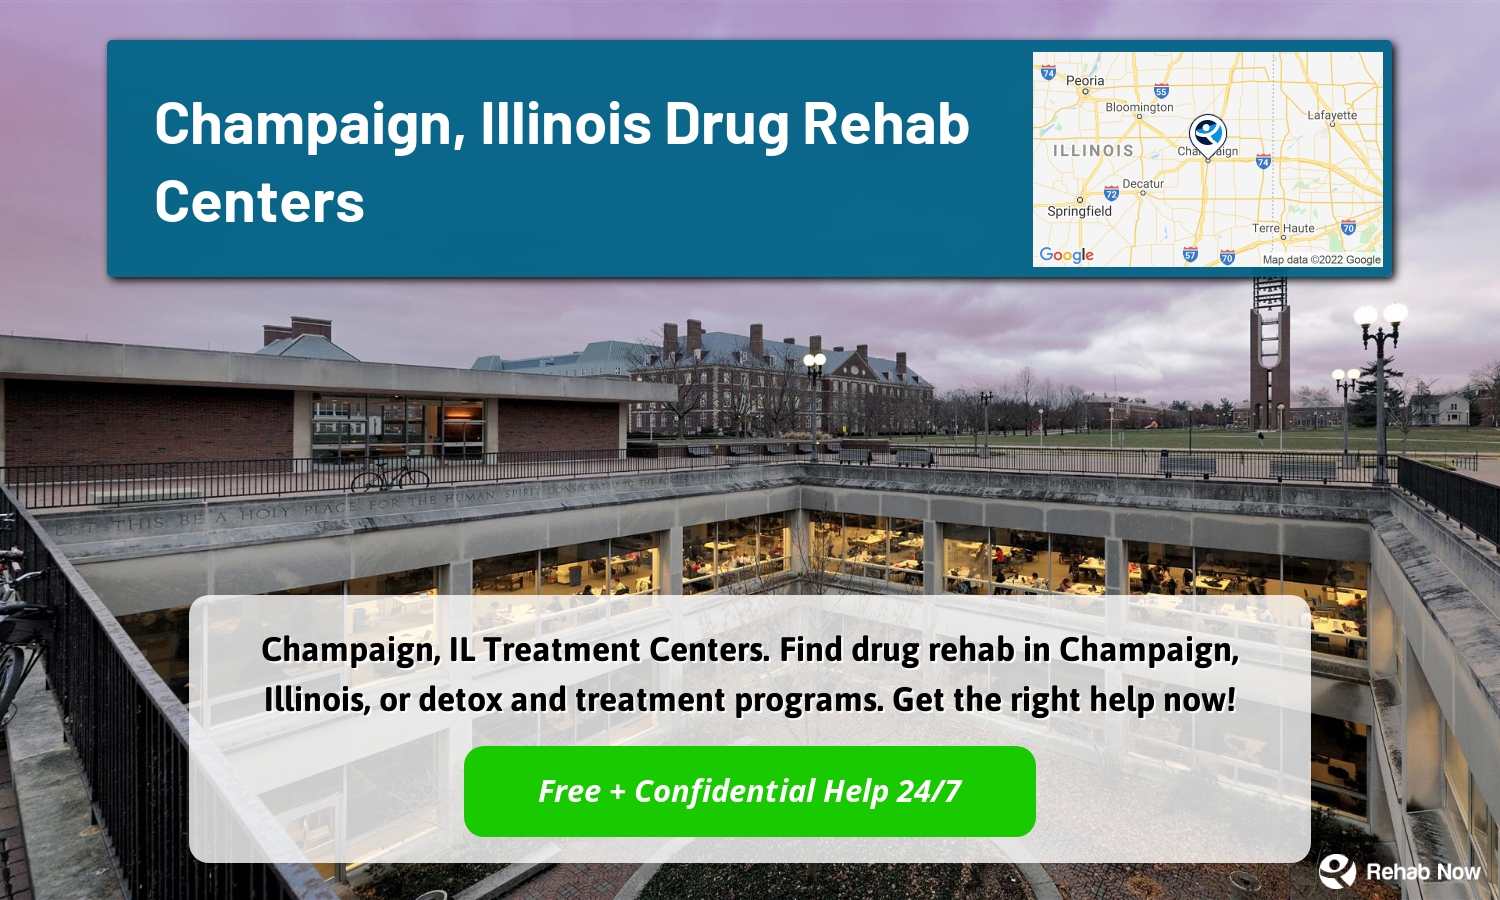 Champaign, IL Treatment Centers. Find drug rehab in Champaign, Illinois, or detox and treatment programs. Get the right help now!